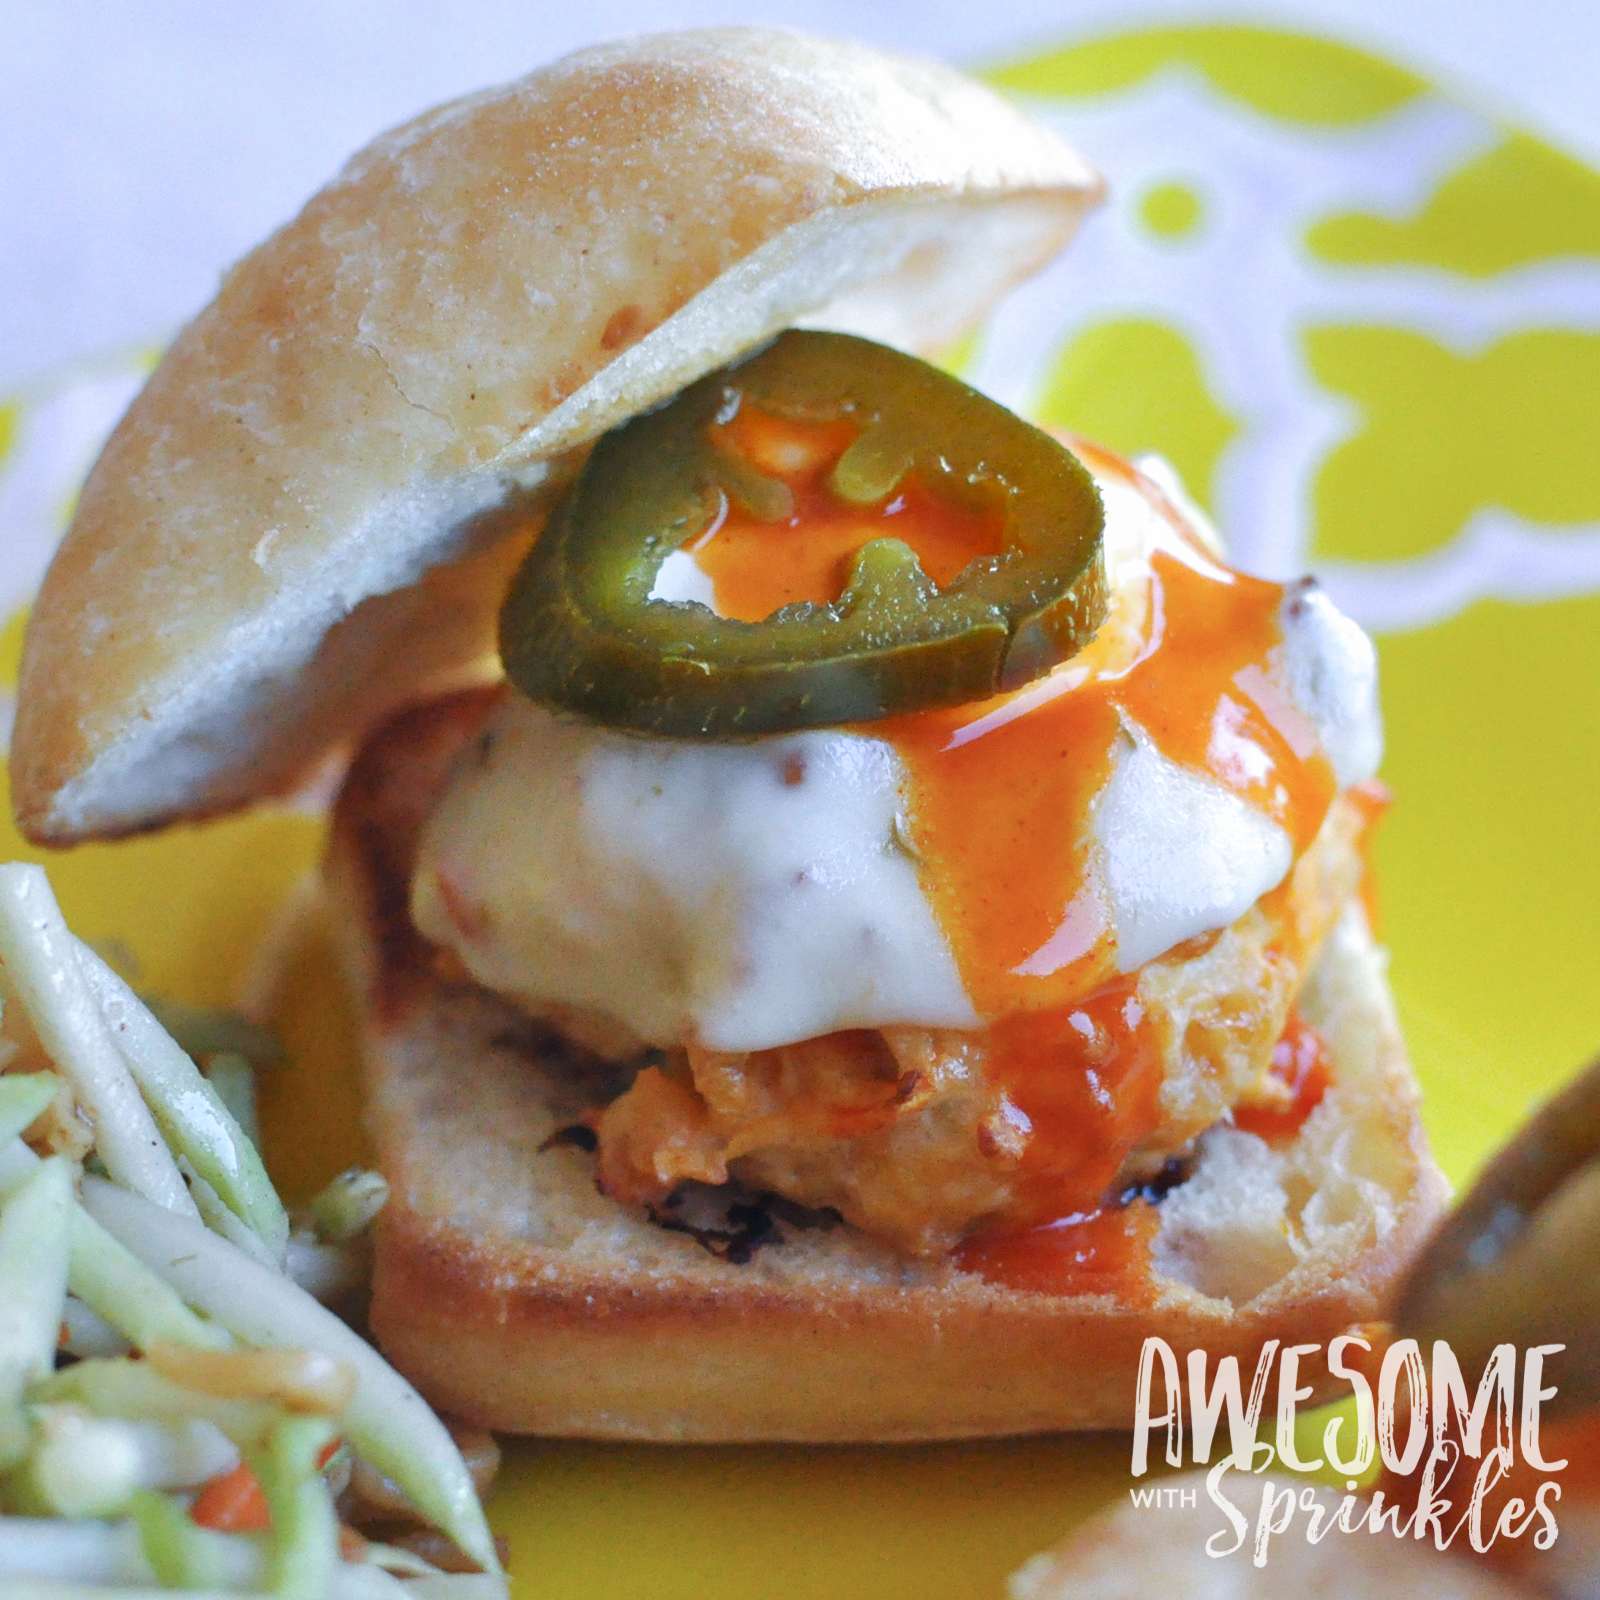 Spicy Buffalo Chicken Sliders by Awesome with Sprinkles